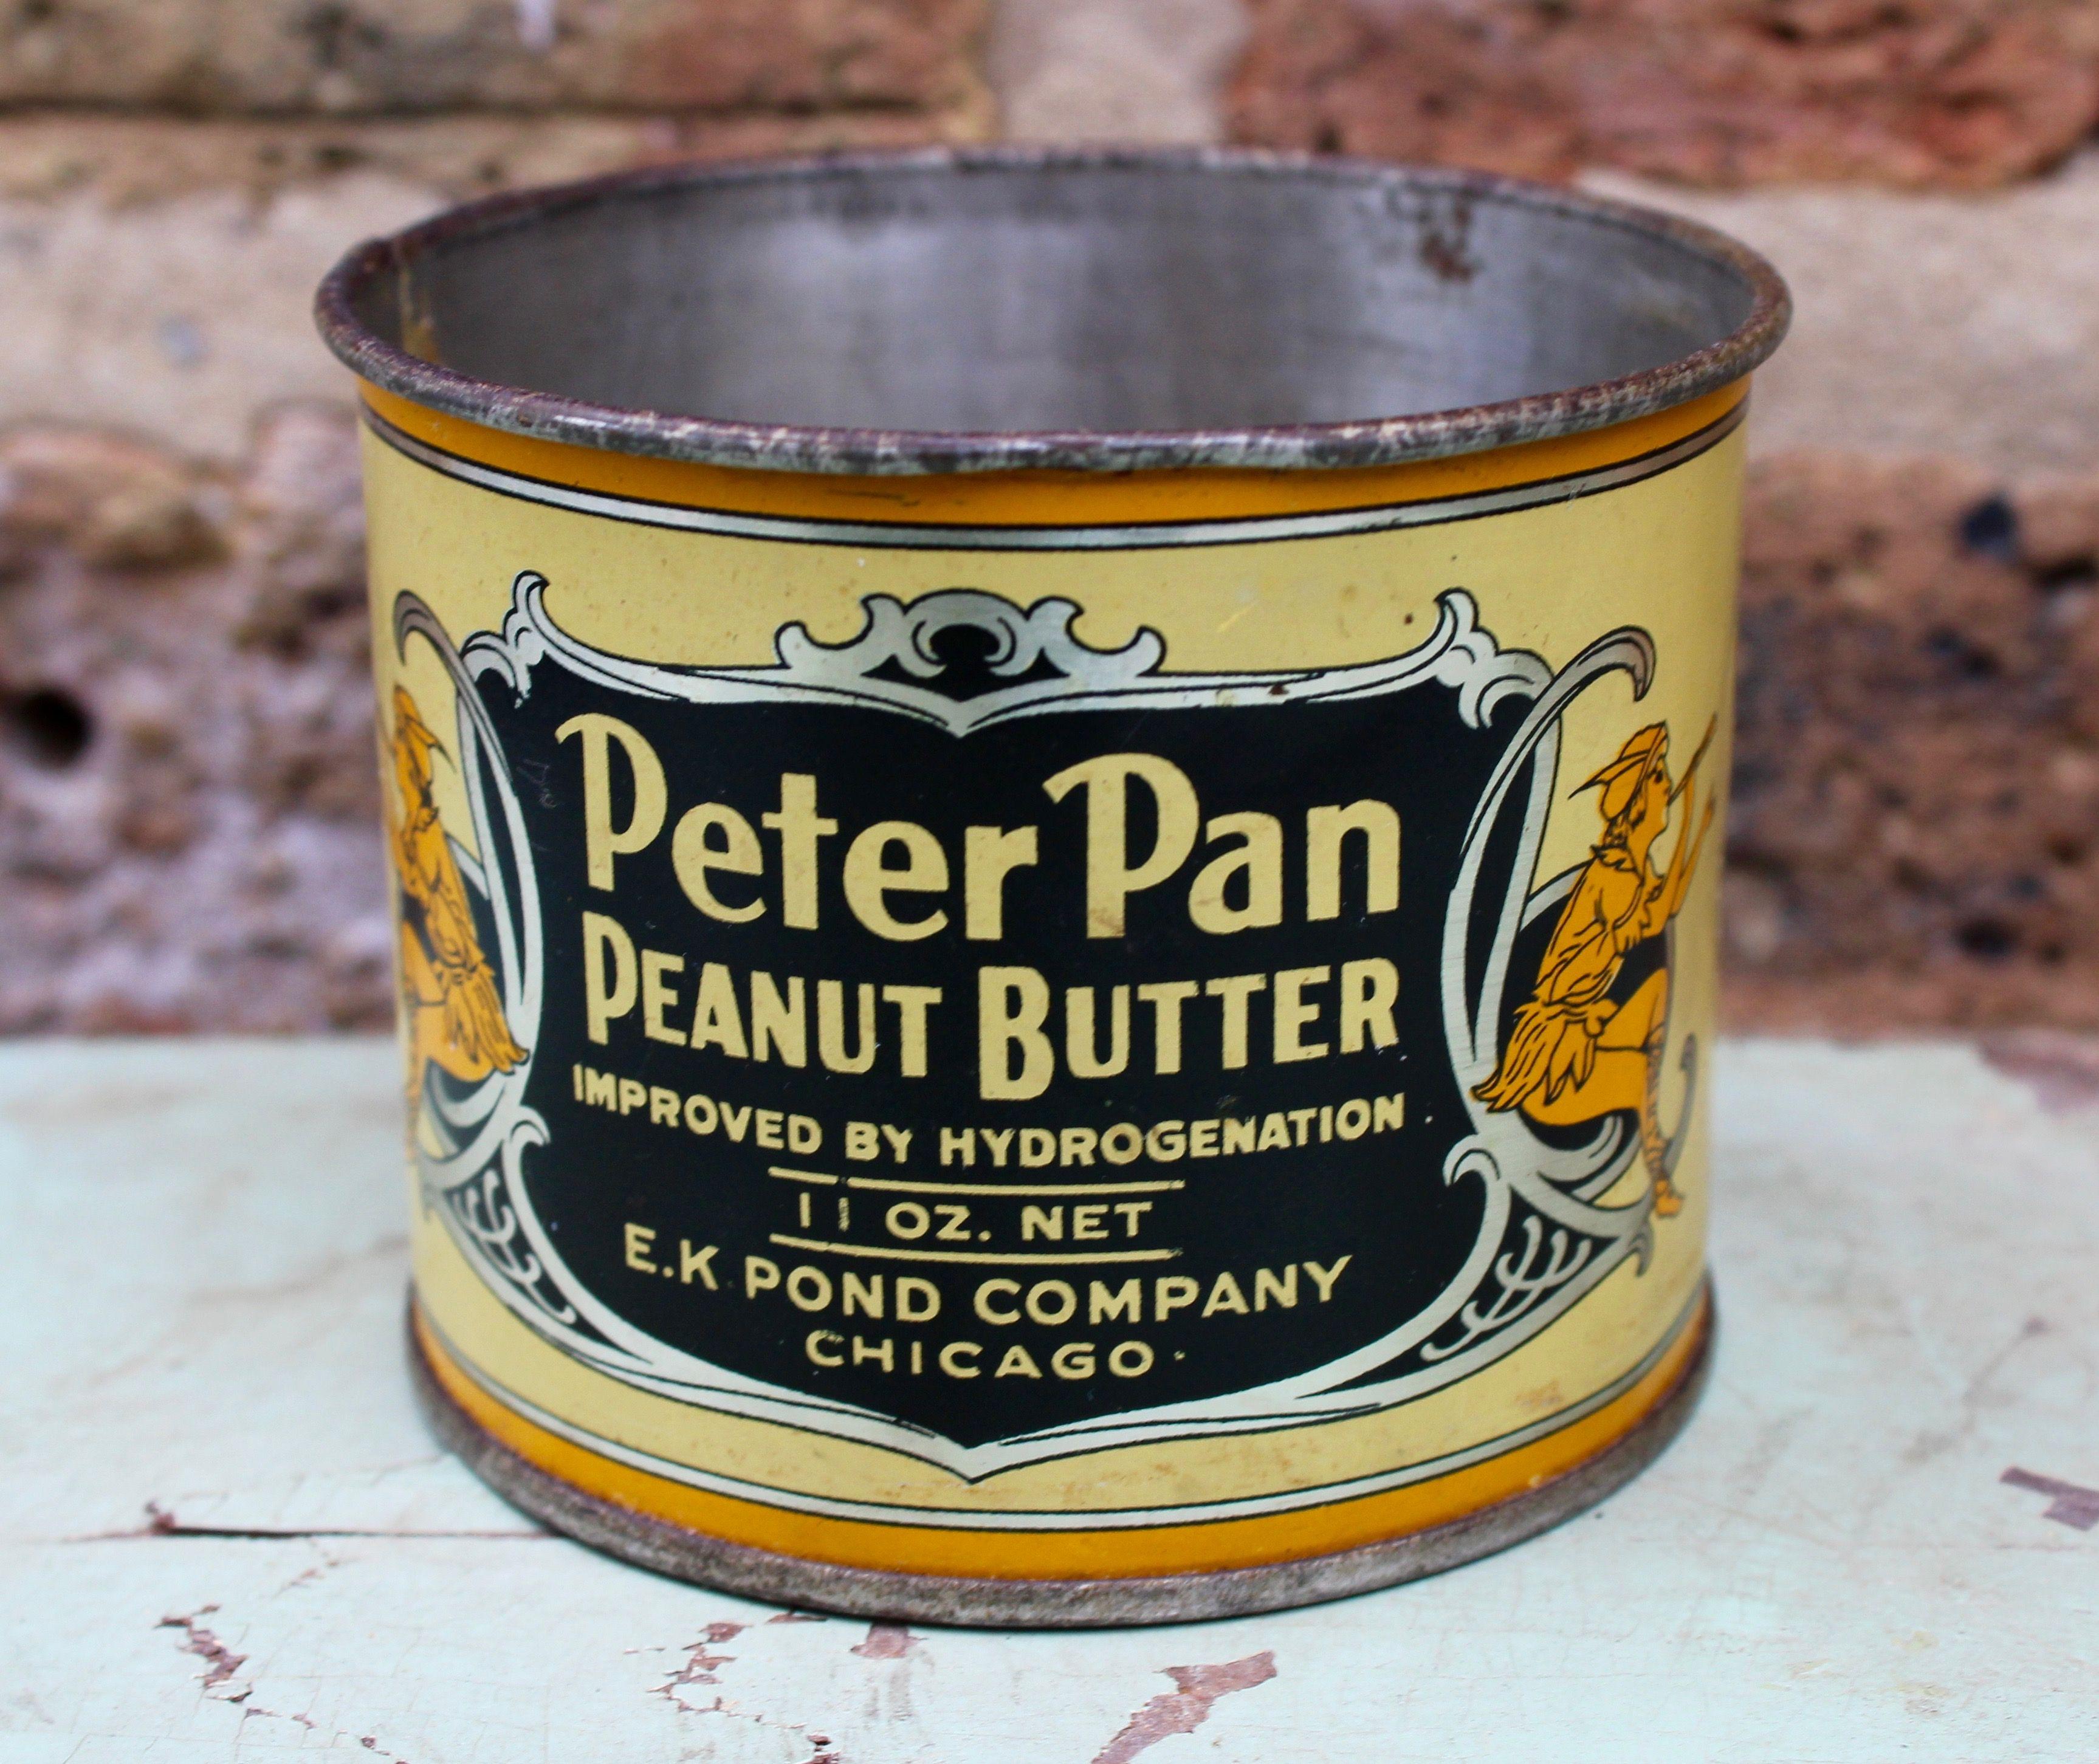 Peter Pan Peanut Butter Logo - History of Peter Pan Peanut Butter & the E. K. Pond Co. | Made-in ...